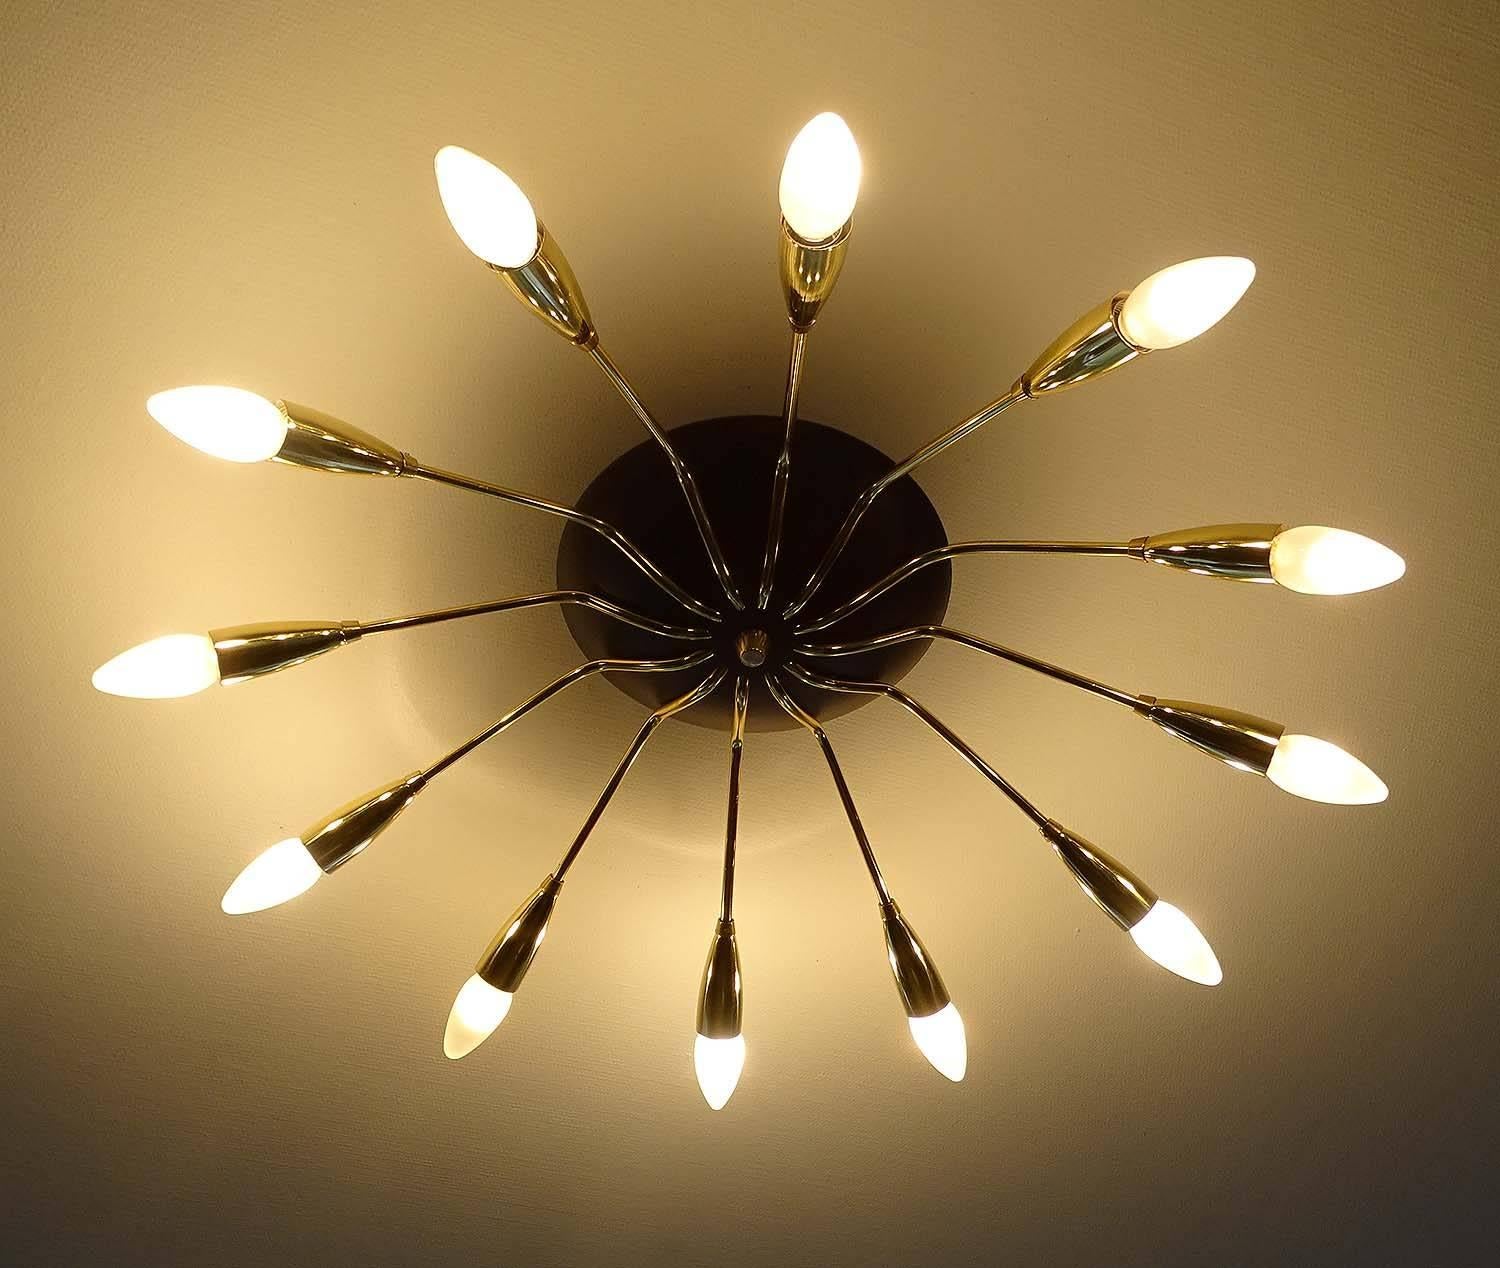 Dimensions
5.91 in.H / 15 cmH
Diameter
29.53 in. (75 cm) Diameter indicated is with the bulbs. 

Twelve candelabra size bulbs, 40 watts each. Rewired - LED compatible 

Large 1950s sunburst Sputnik chandelier, 12 brass curved spokes flush mounted on